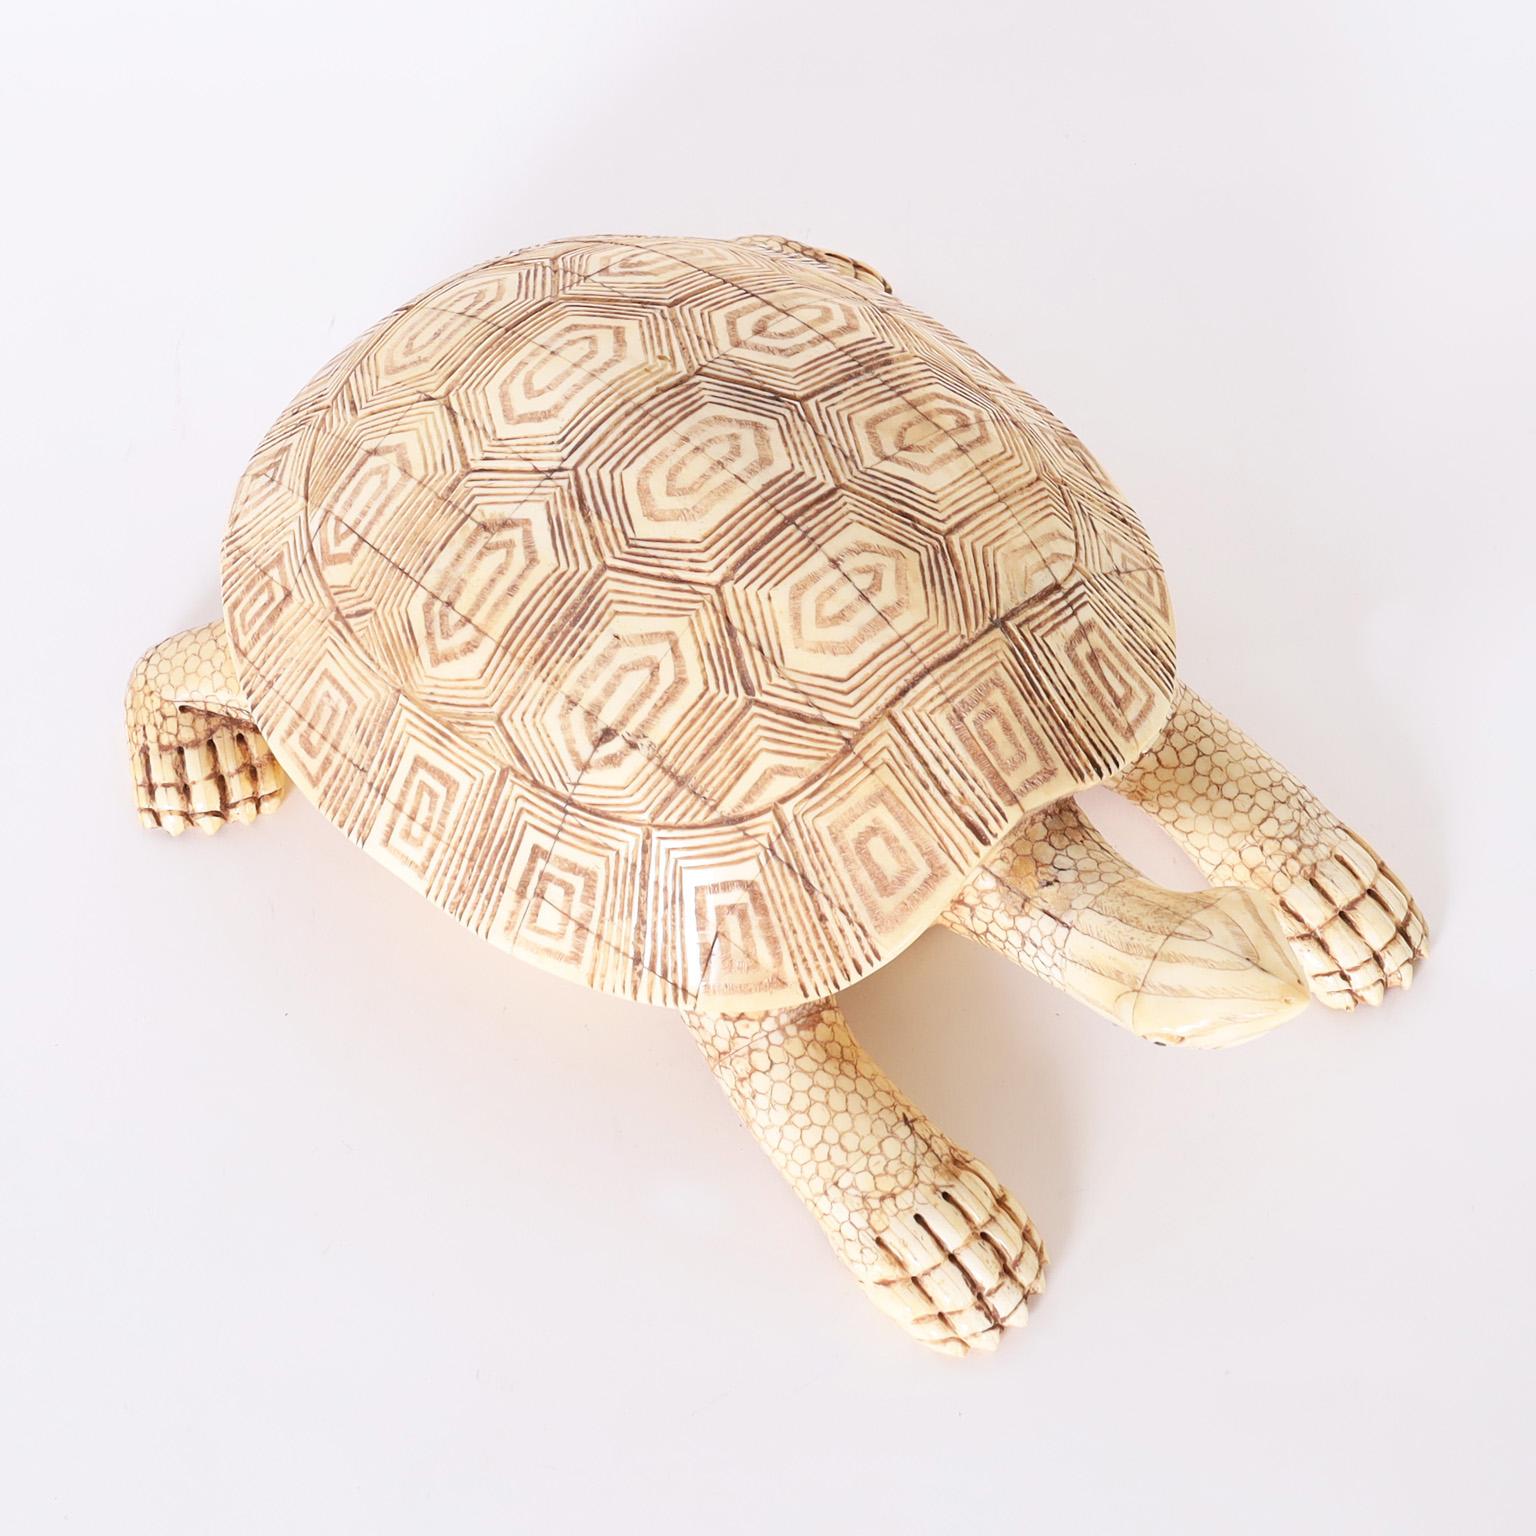 Chinese Carved Bone Turtle For Sale